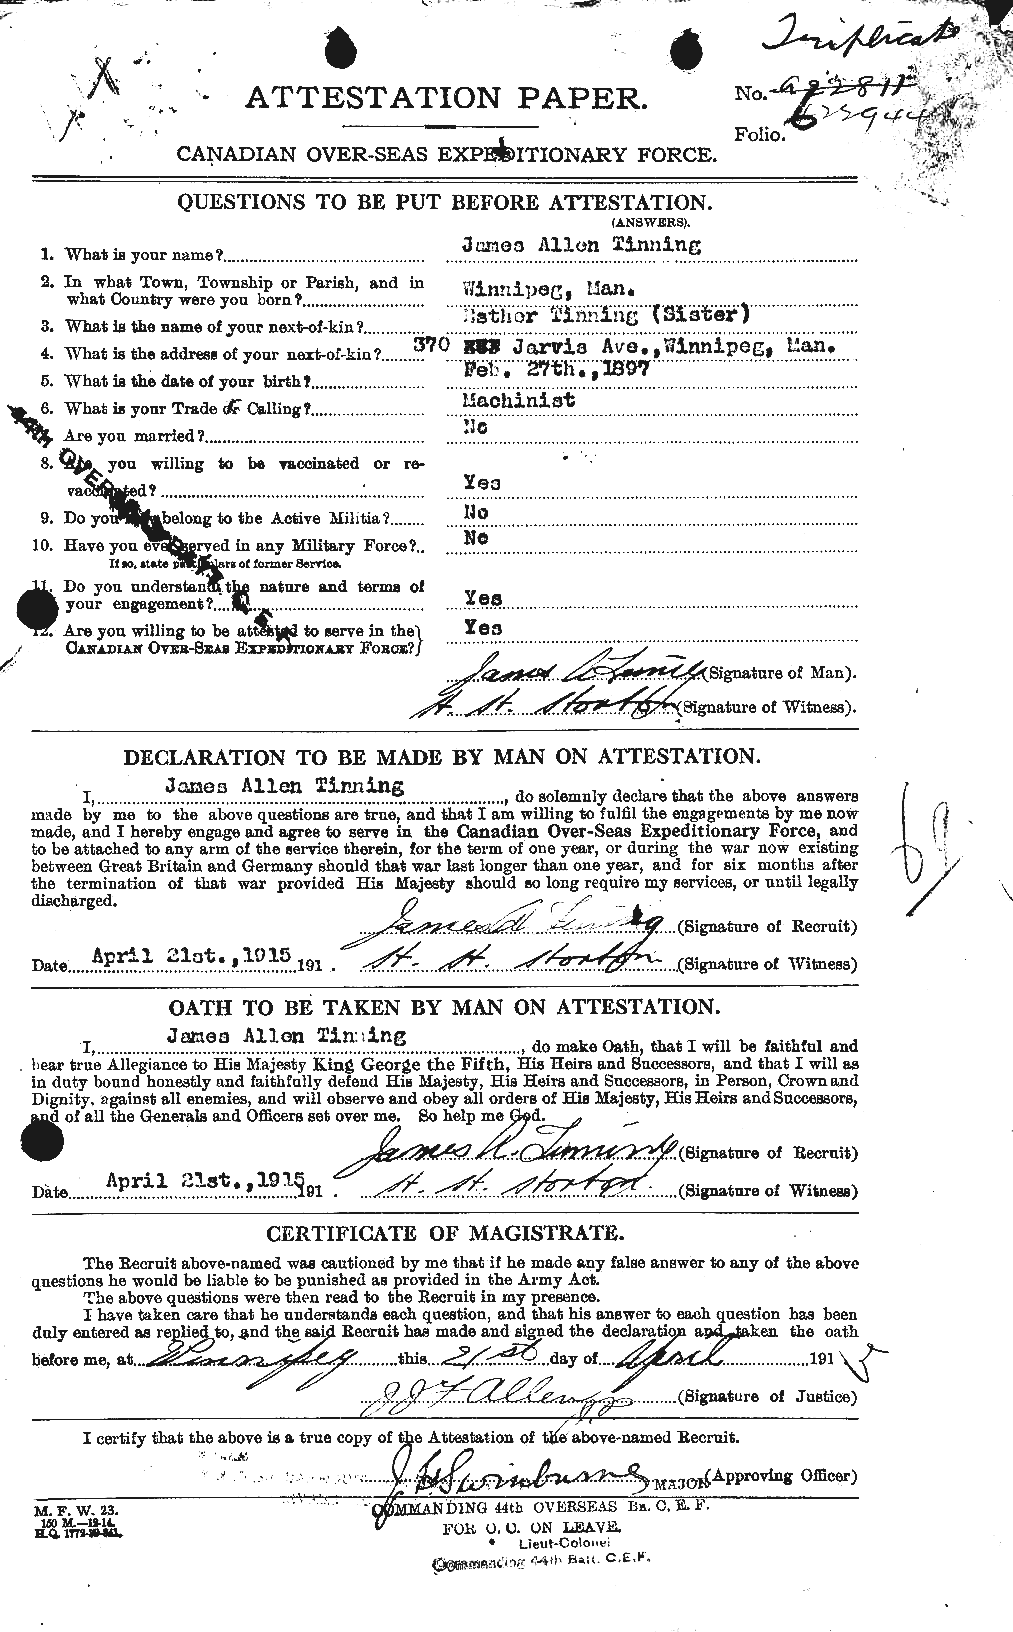 Personnel Records of the First World War - CEF 634716a